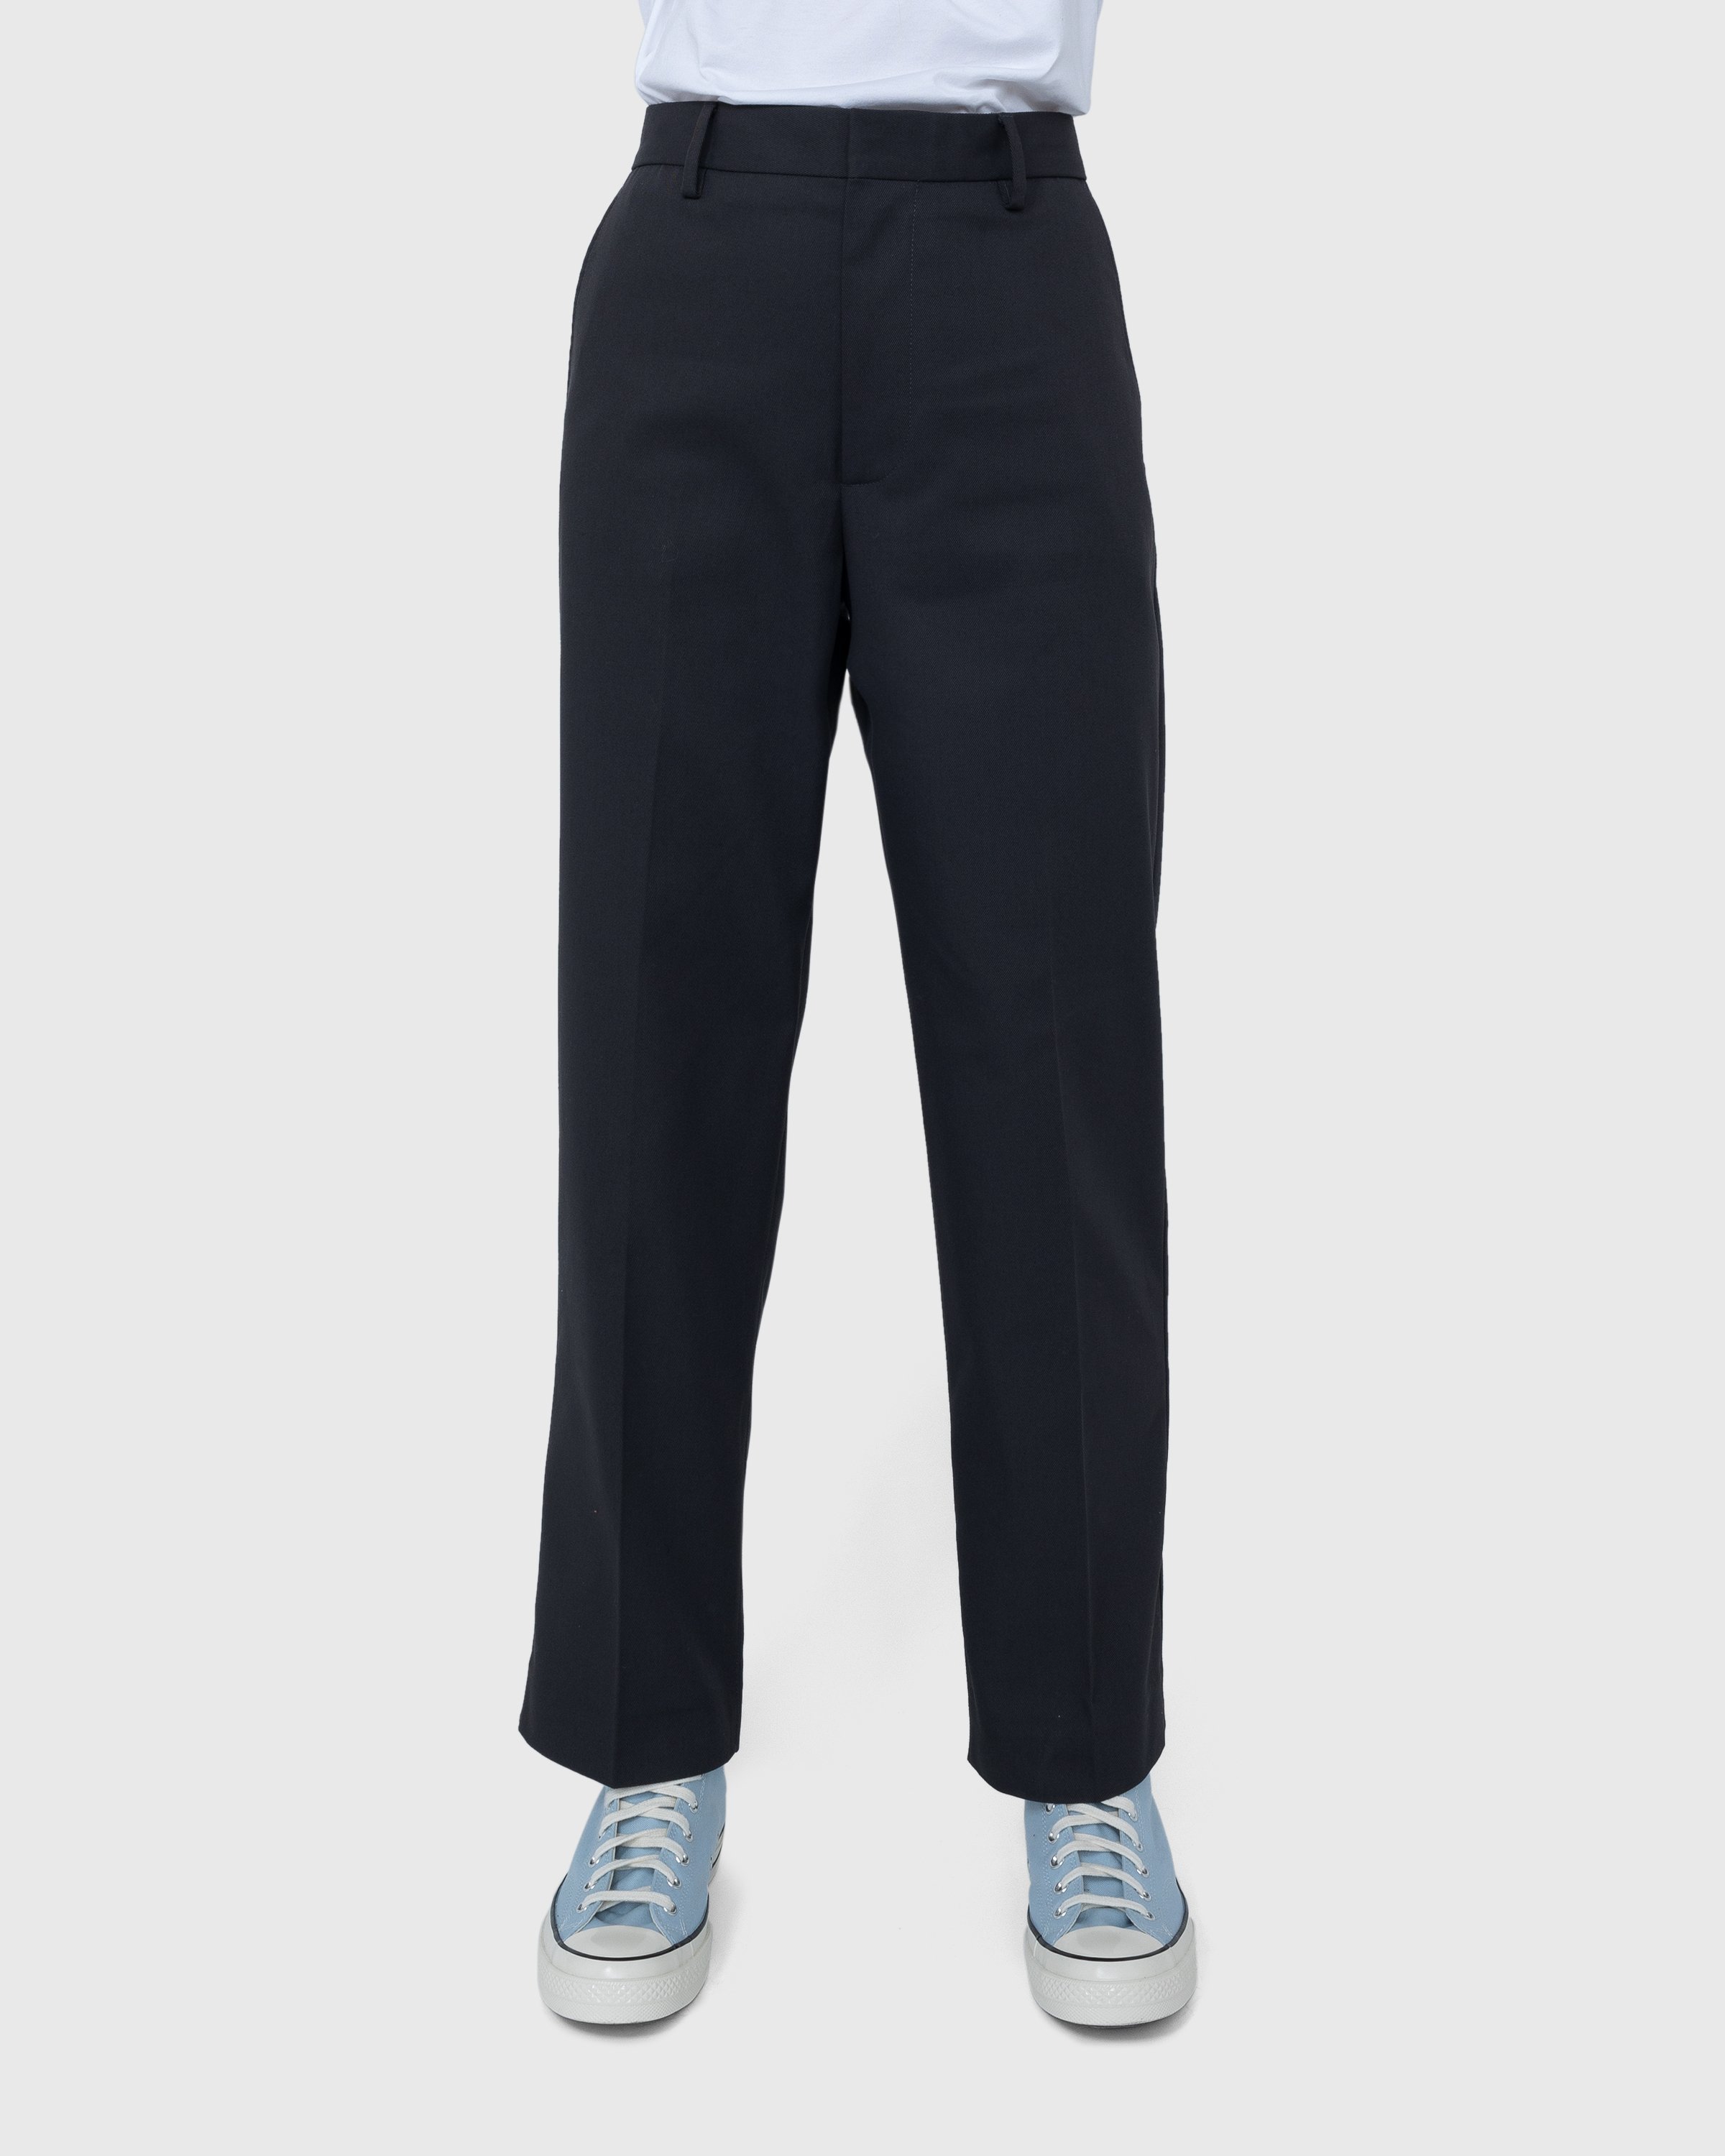 Acne Studios - Casual Trousers Anthracite Grey - Clothing - Grey - Image 2